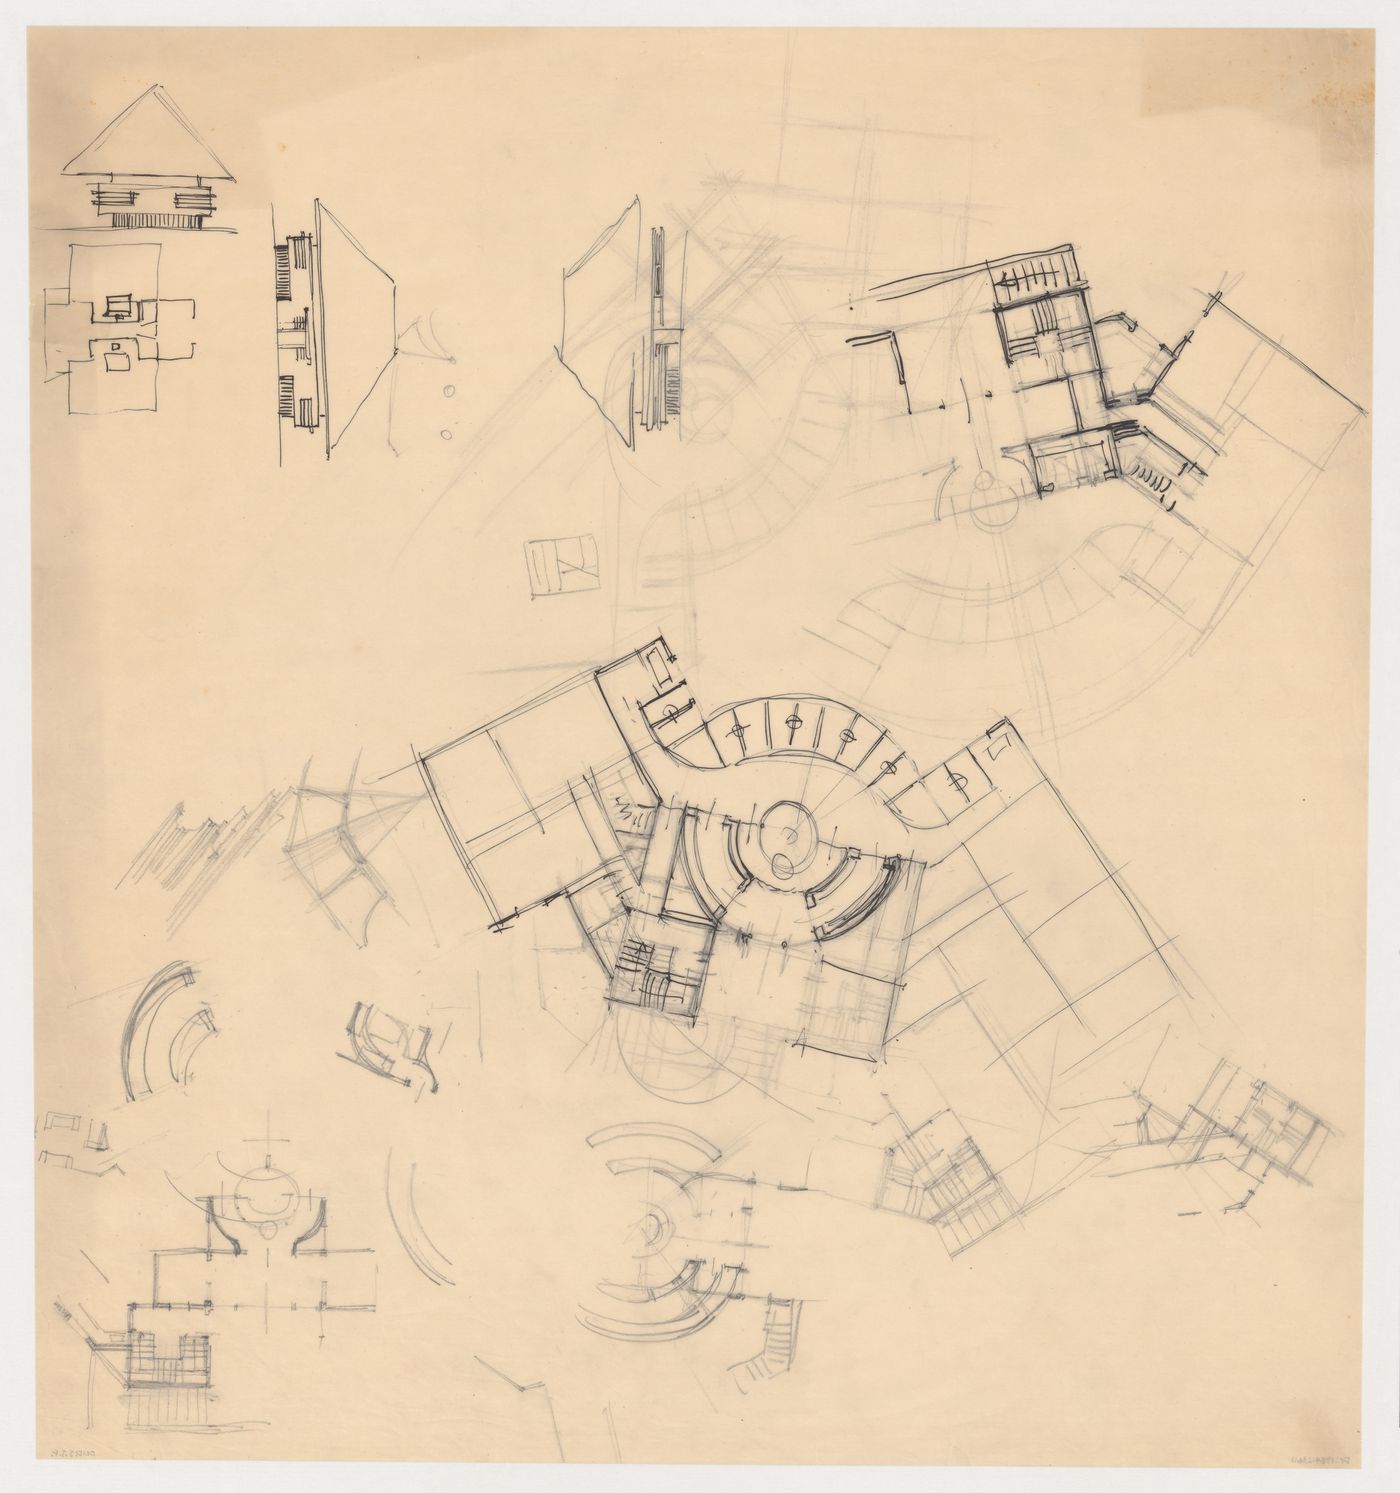 Sketch plan for a city hall for the reconstruction of the Hofplein (city centre), Rotterdam, Netherlands, and sketch plan and elevations for an unidentified structure